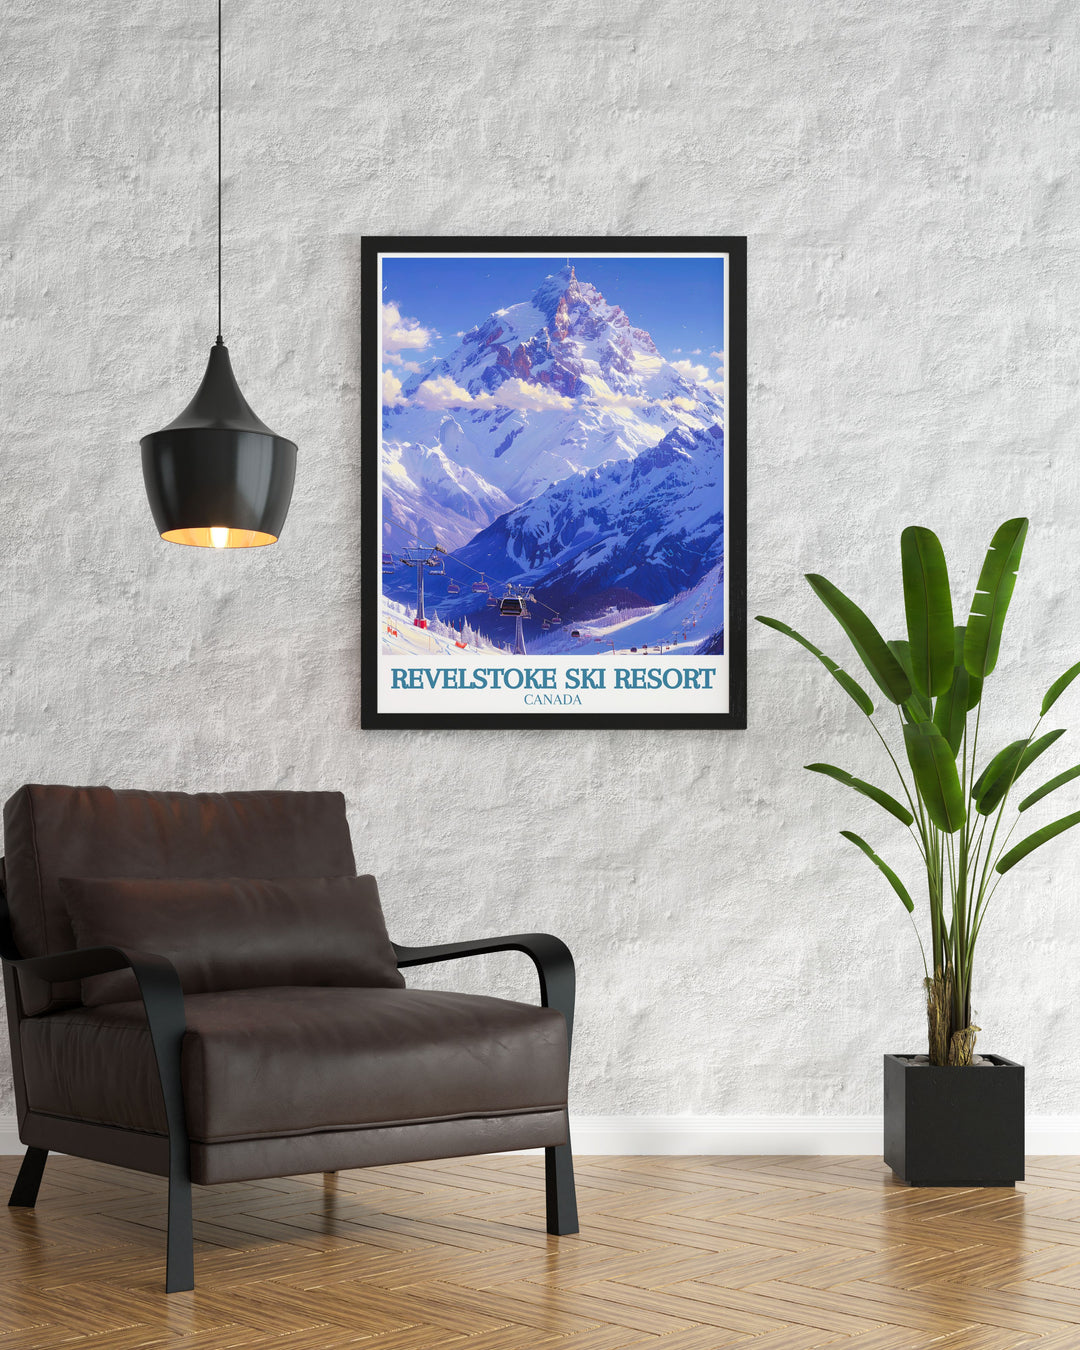 Ski Resort Print featuring Mount Mackenzie and the Revelation Gondola cable car. This British Columbia art piece captures the spirit of skiing and the stunning landscapes of Canada. Ideal for wall art in any mountain resort themed room.